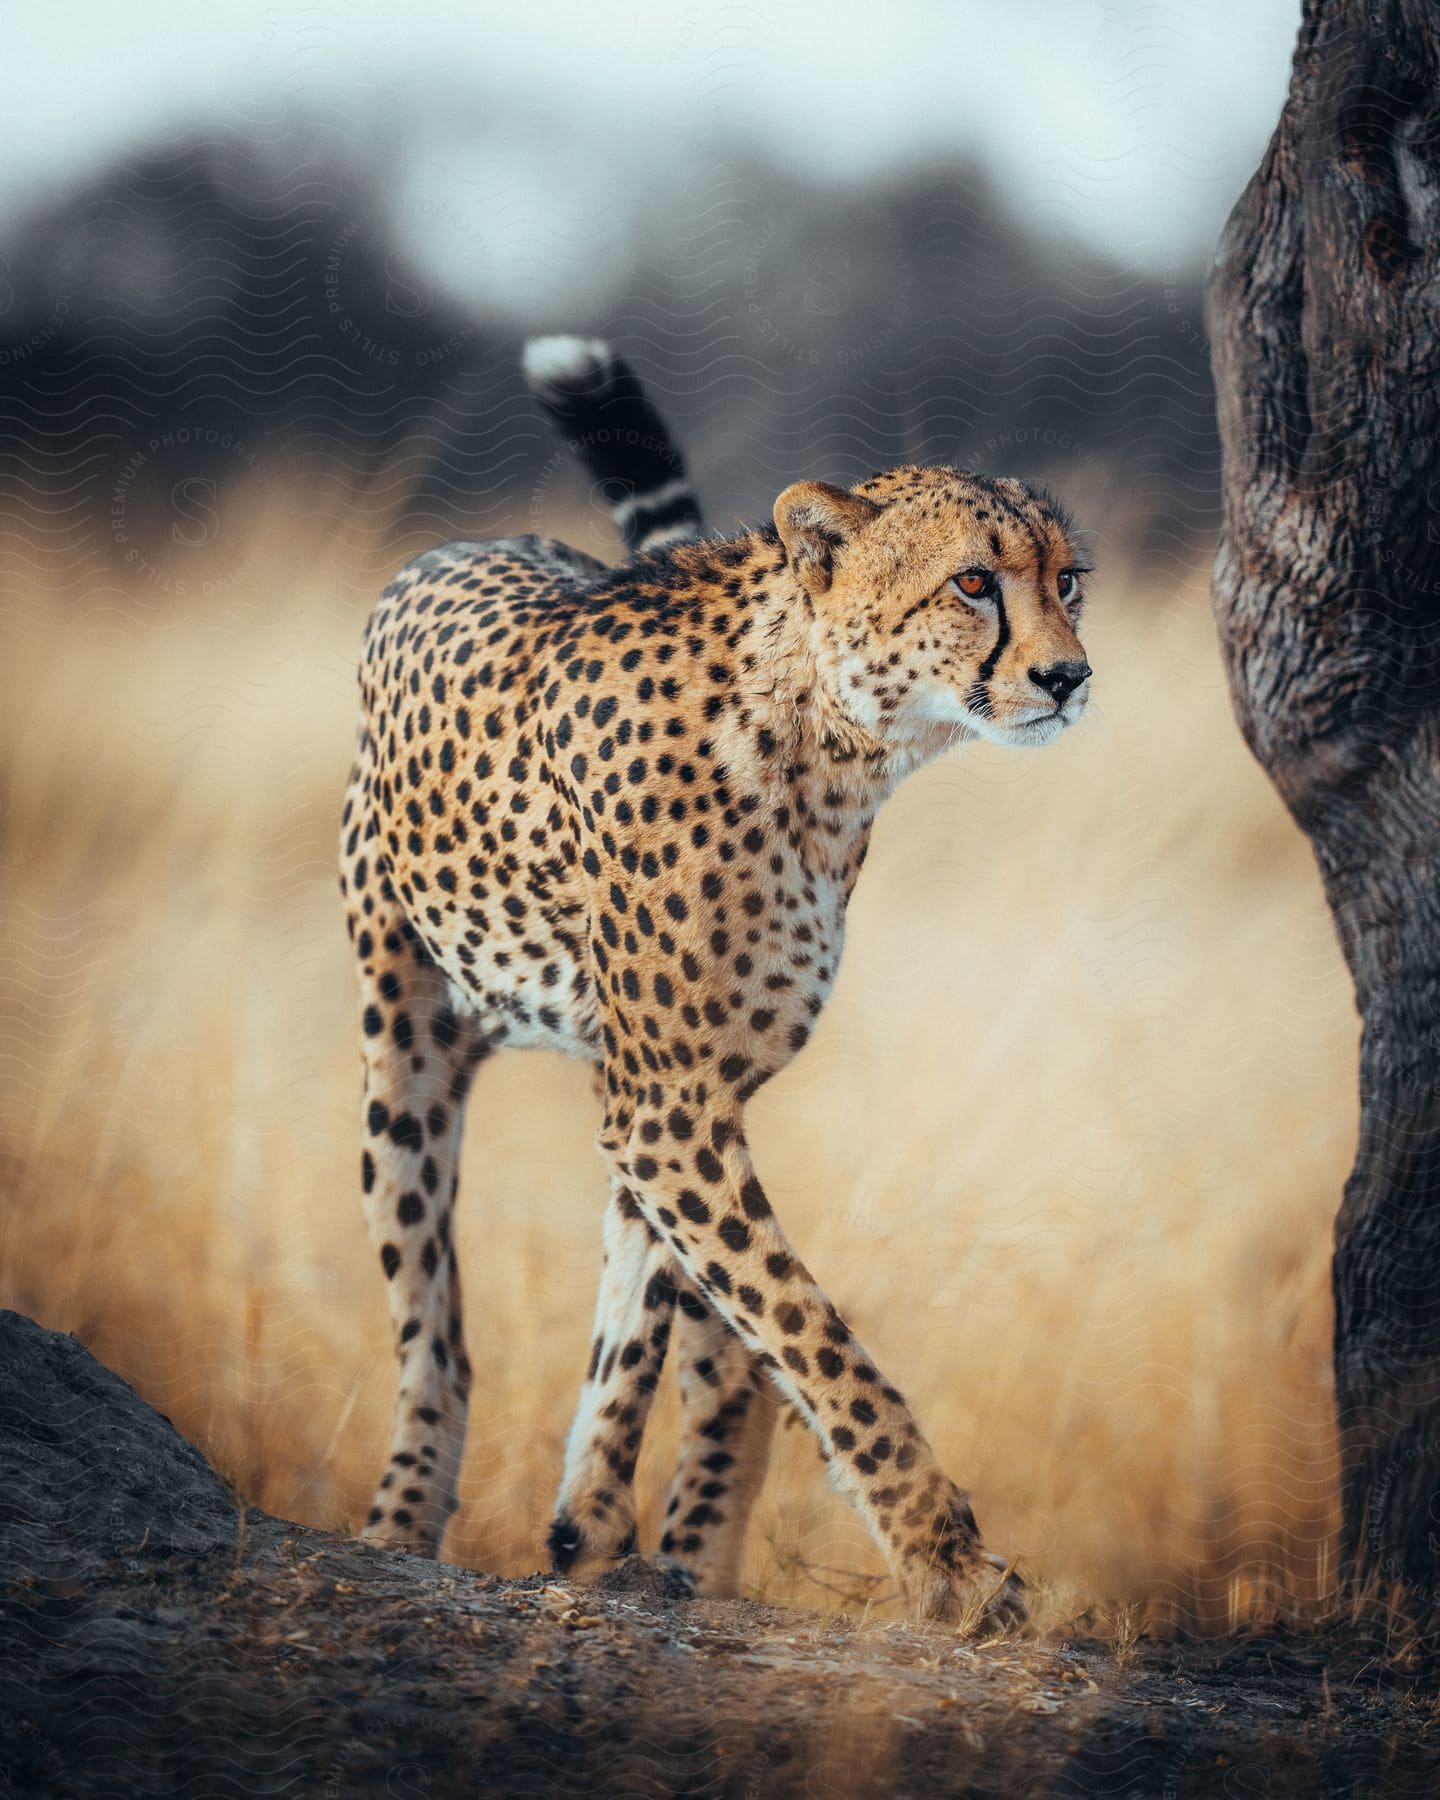 Cheetah walking near a tree in the savanna surrounded by yellow dry grass